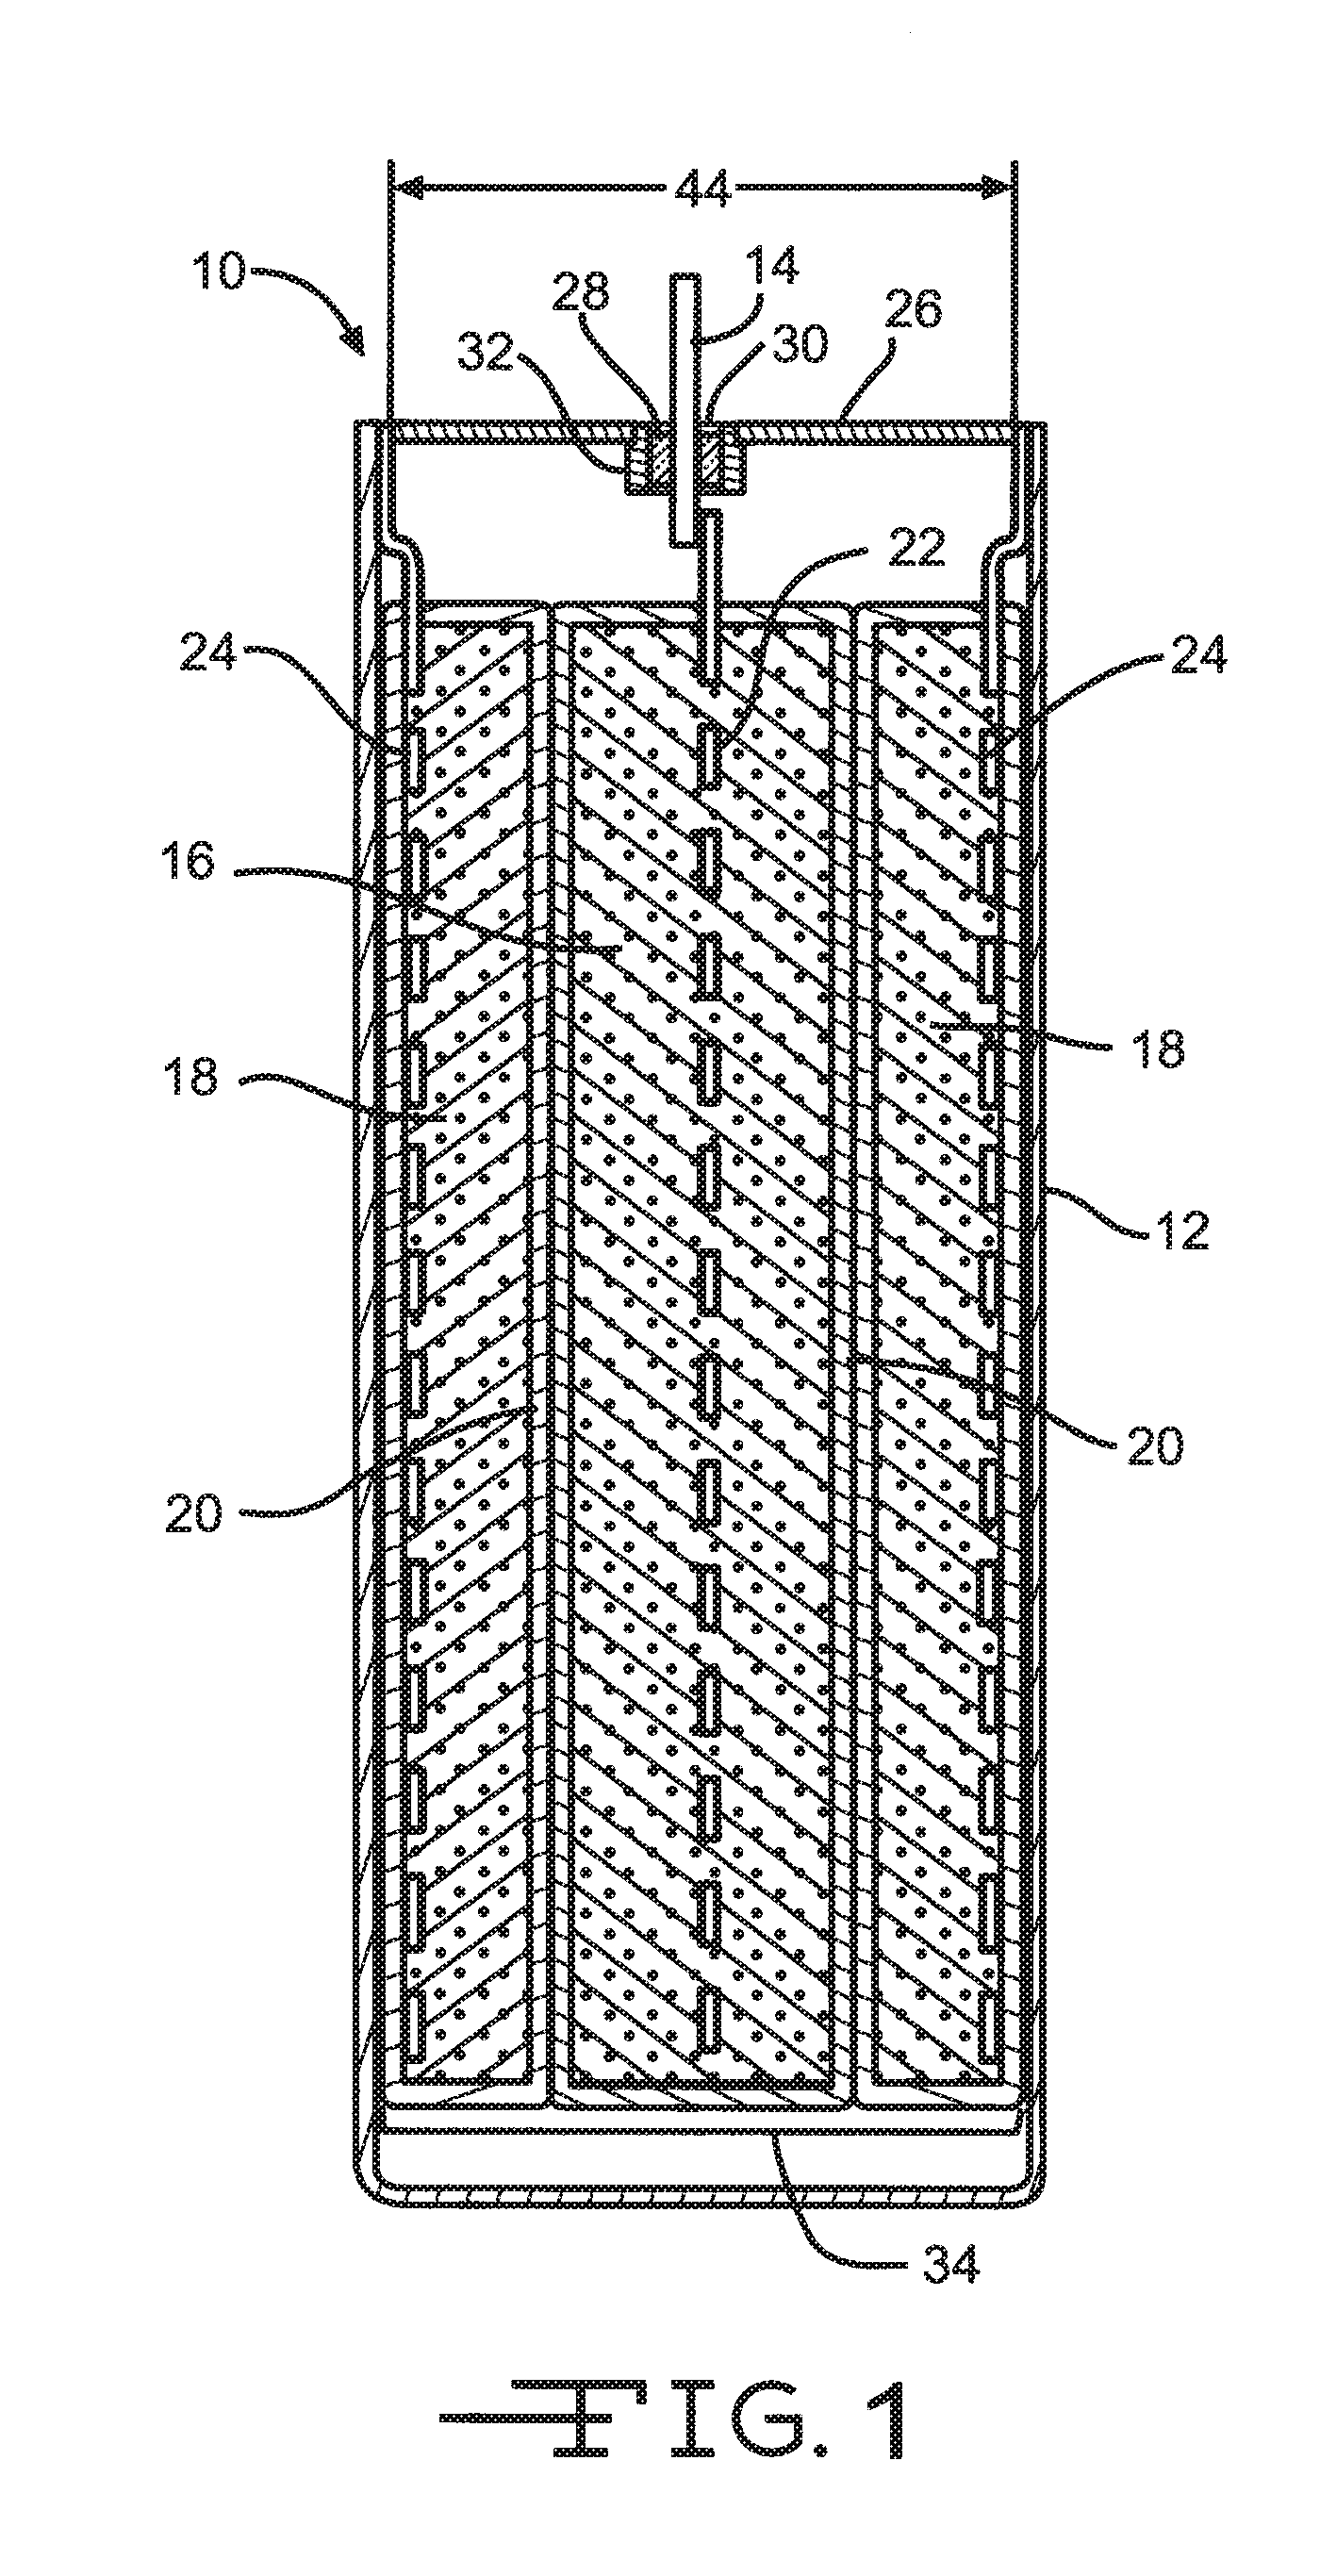 Novel Method For Gold Plated Termination of Hermetic Device